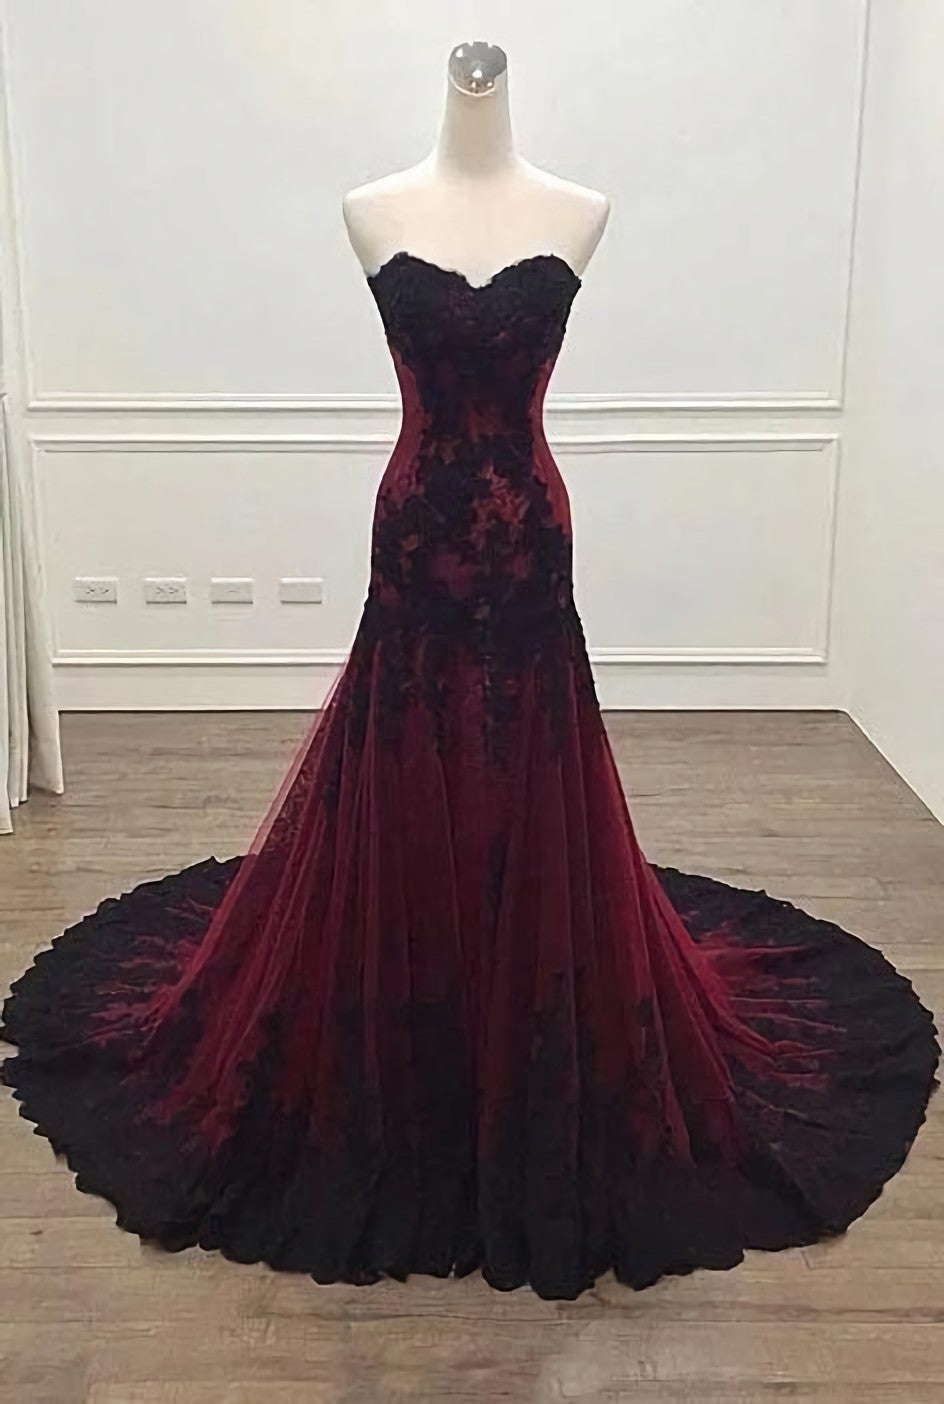 Party Dress For Couple, Long Sheath Sweetheart Black And Red Evening Prom Dress